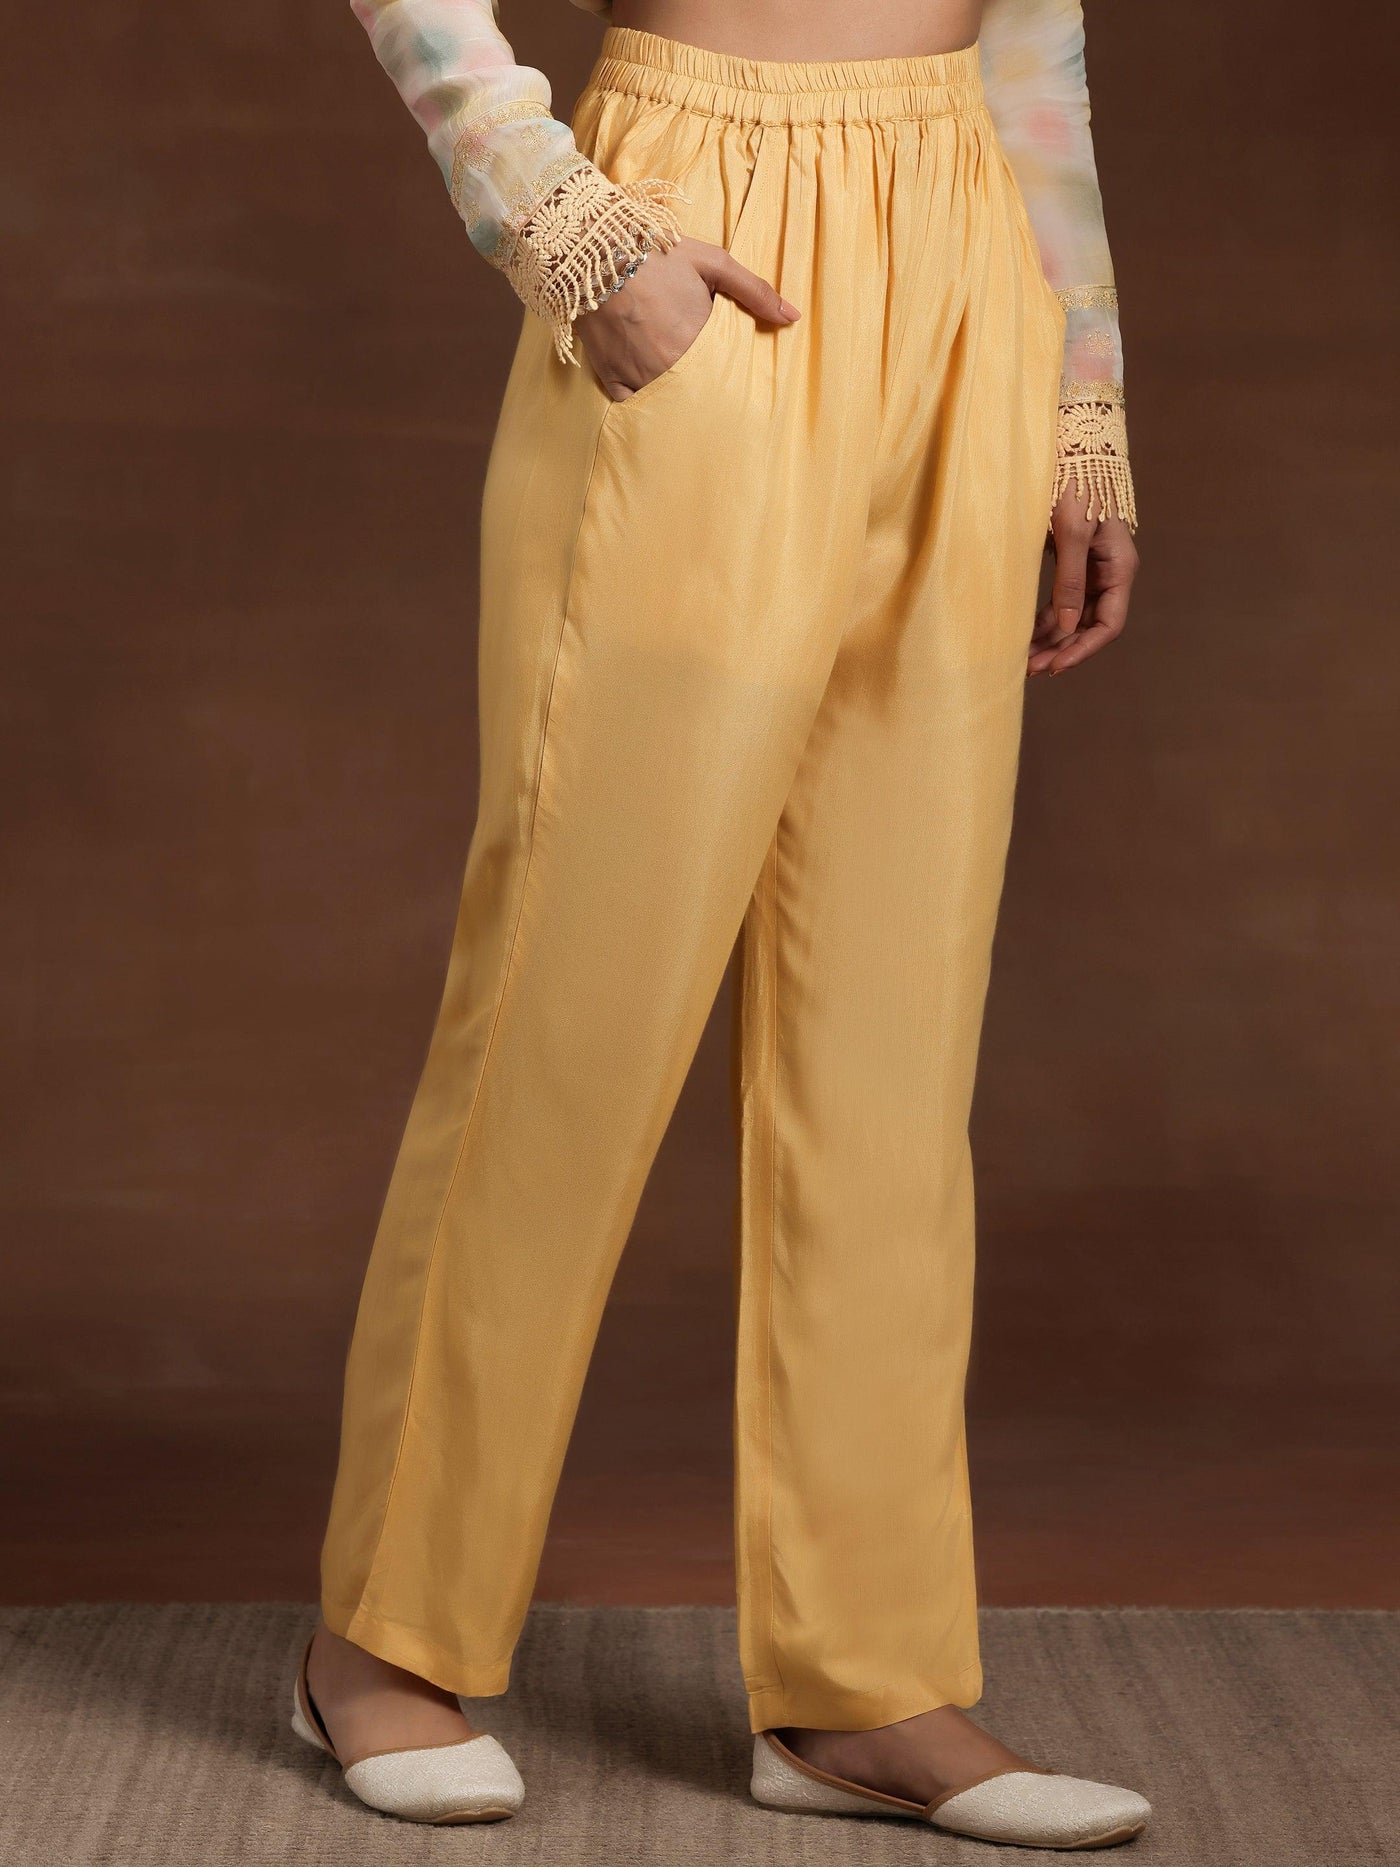 Yellow Embroidered Organza Straight Suit With Dupatta - Libas